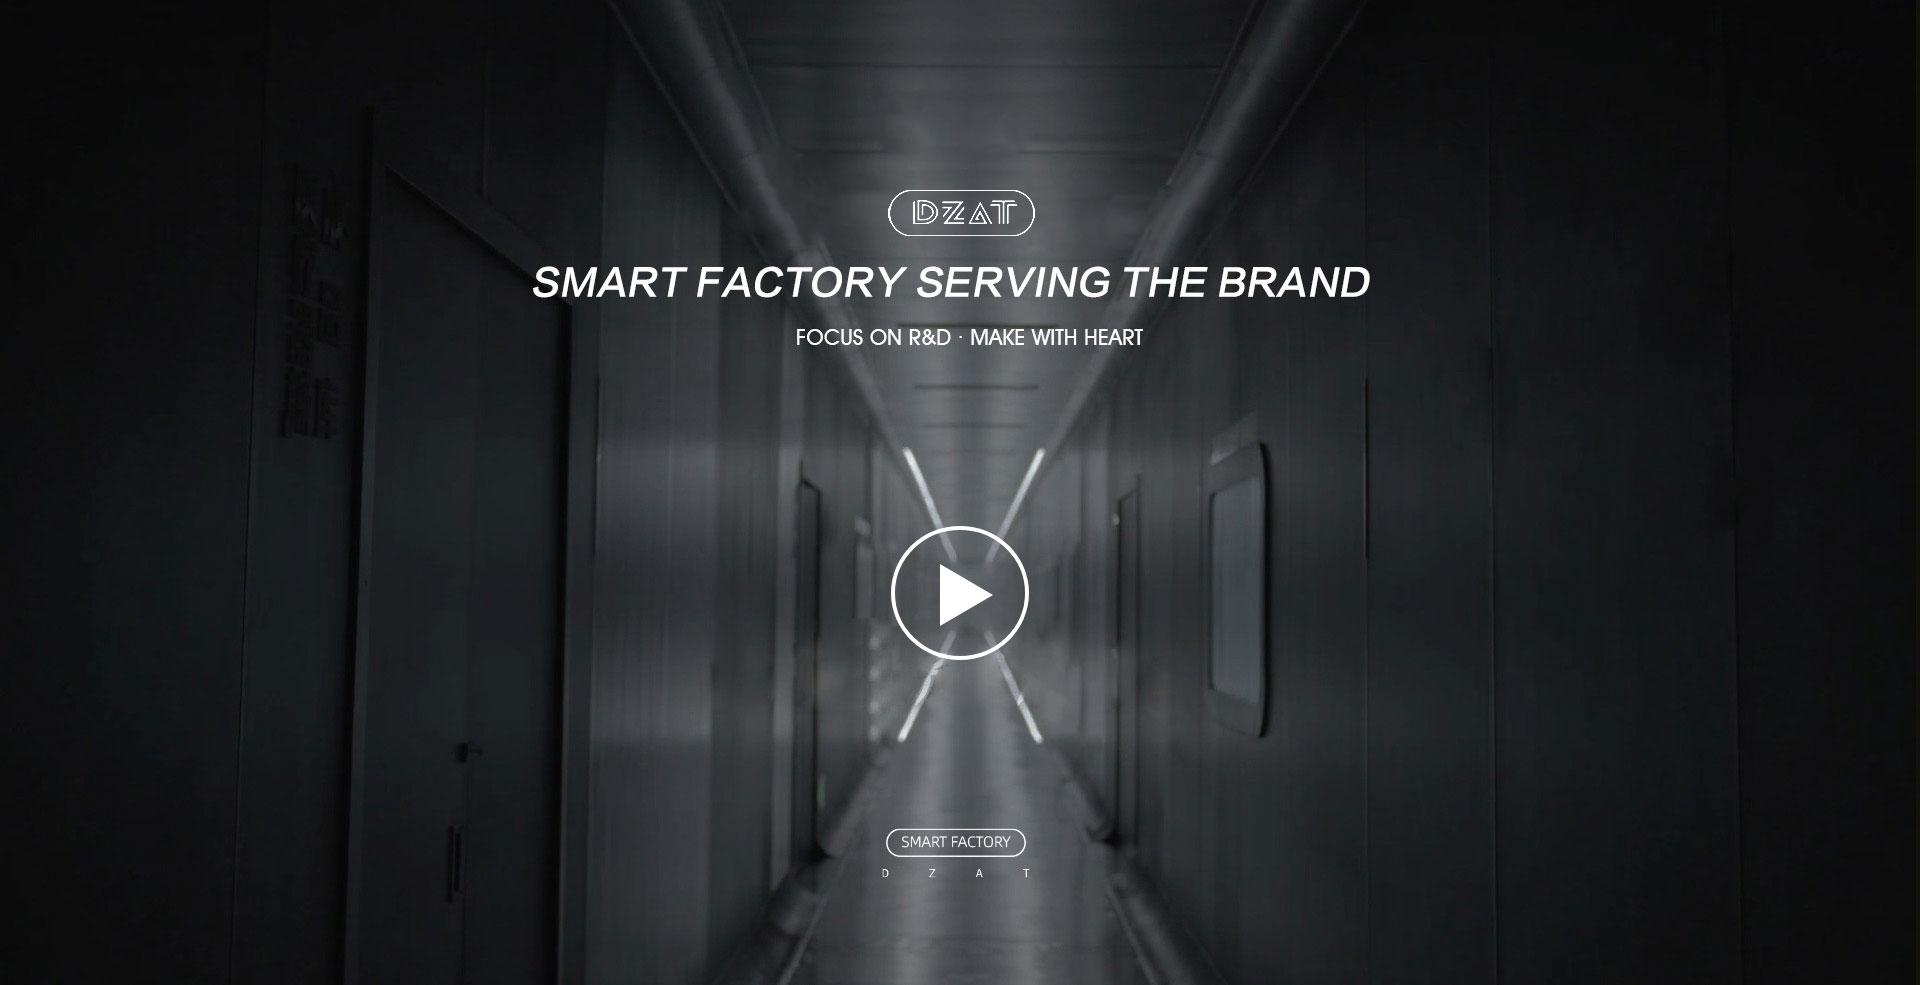 SMART FACTORY SERVING THE BRAND